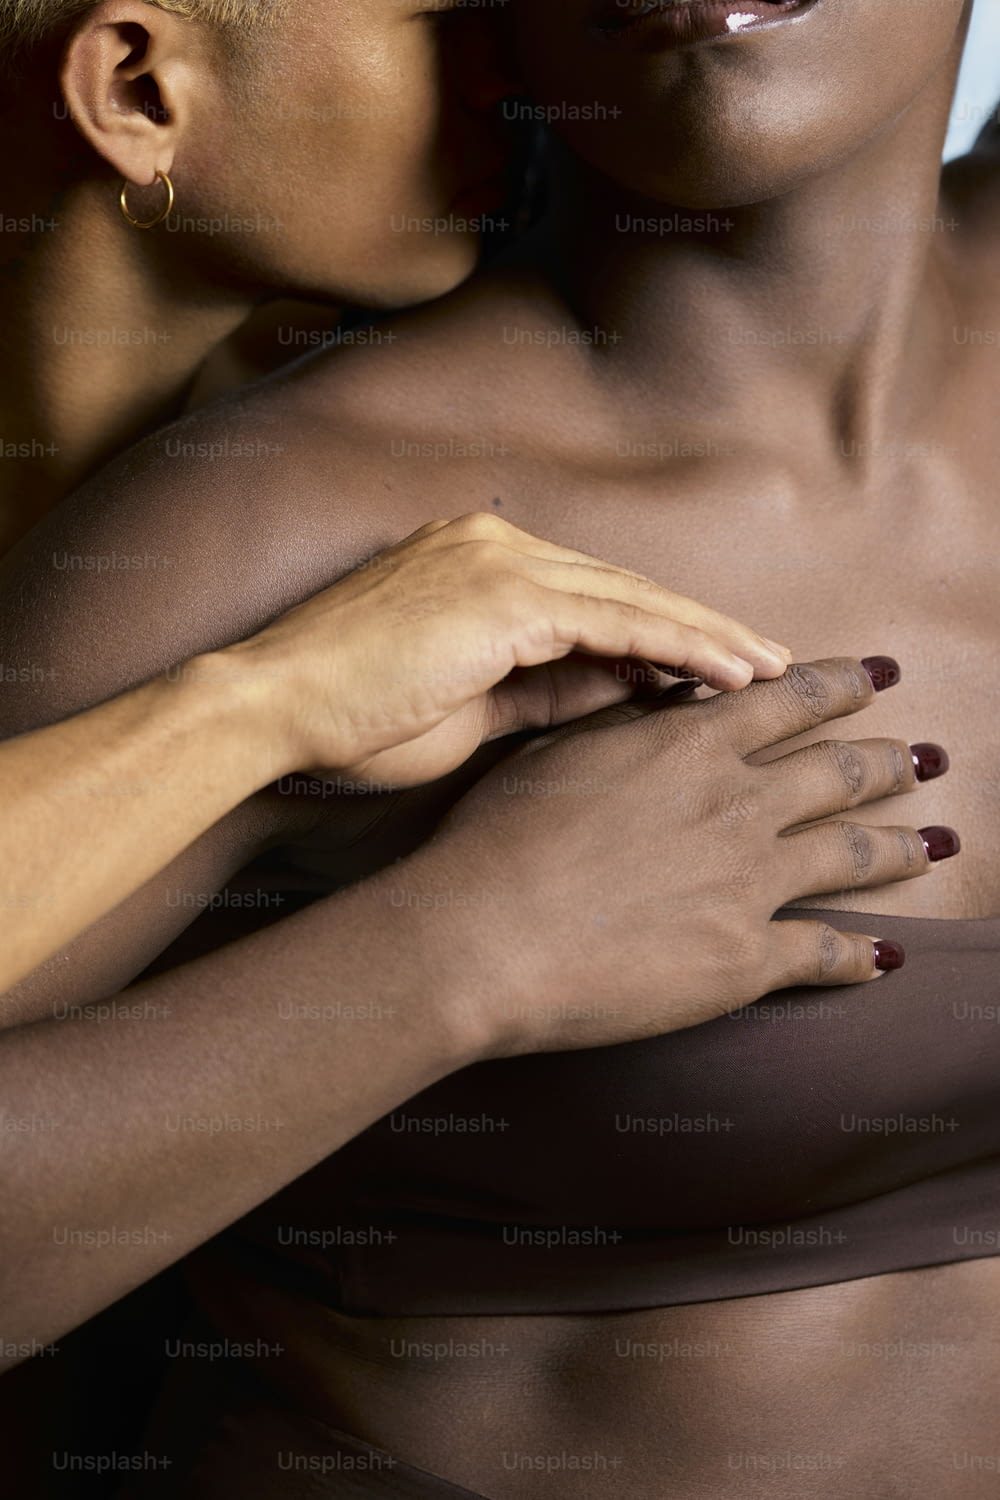 a close up of a woman with her hands on her chest